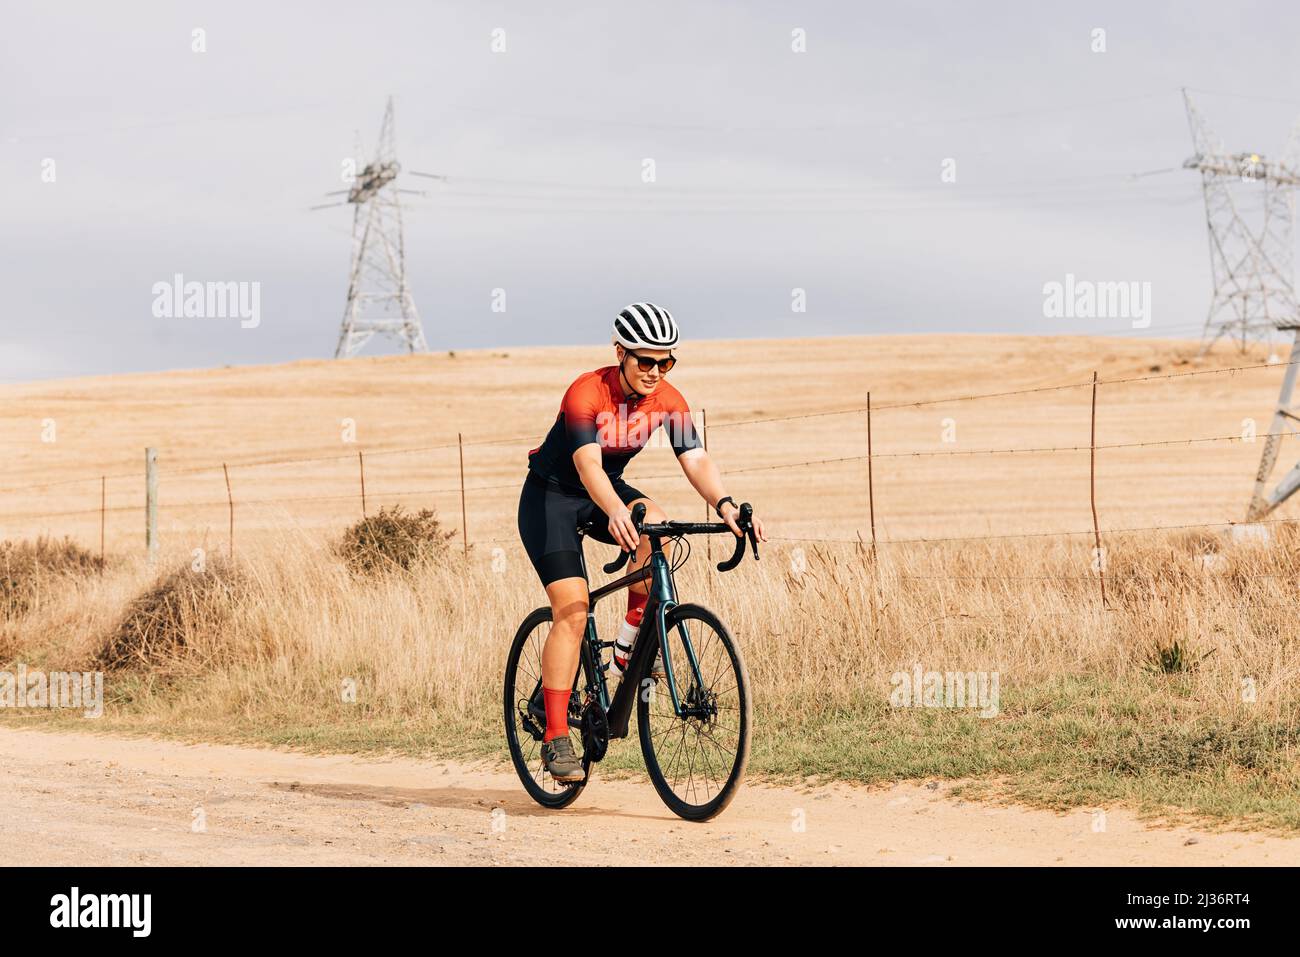 Professional athlete cycling on countryside. Cyclist riding bike. Stock Photo